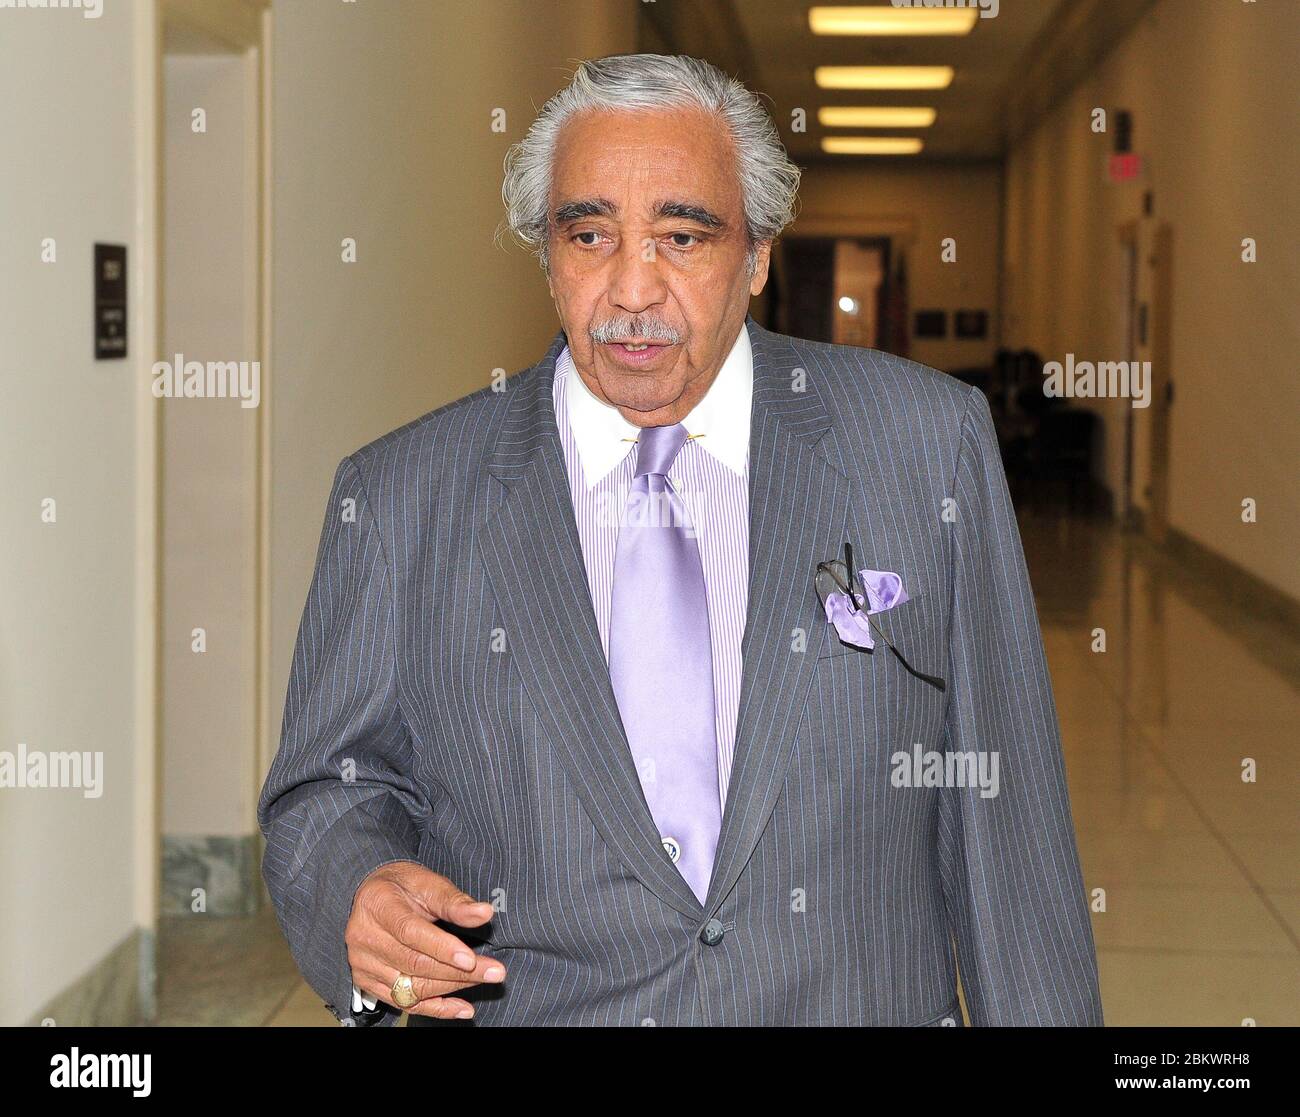 United States Representative Charlie Rangel (Democrat of New York) departs from his Capitol Hill office on Tuesday, November 30, 2010.Credit: Ron Sachs / CNP  (RESTRICTION: NO New York or New Jersey Newspapers or newspapers within a 75 mile radius of New York City) / MediaPunch Stock Photo